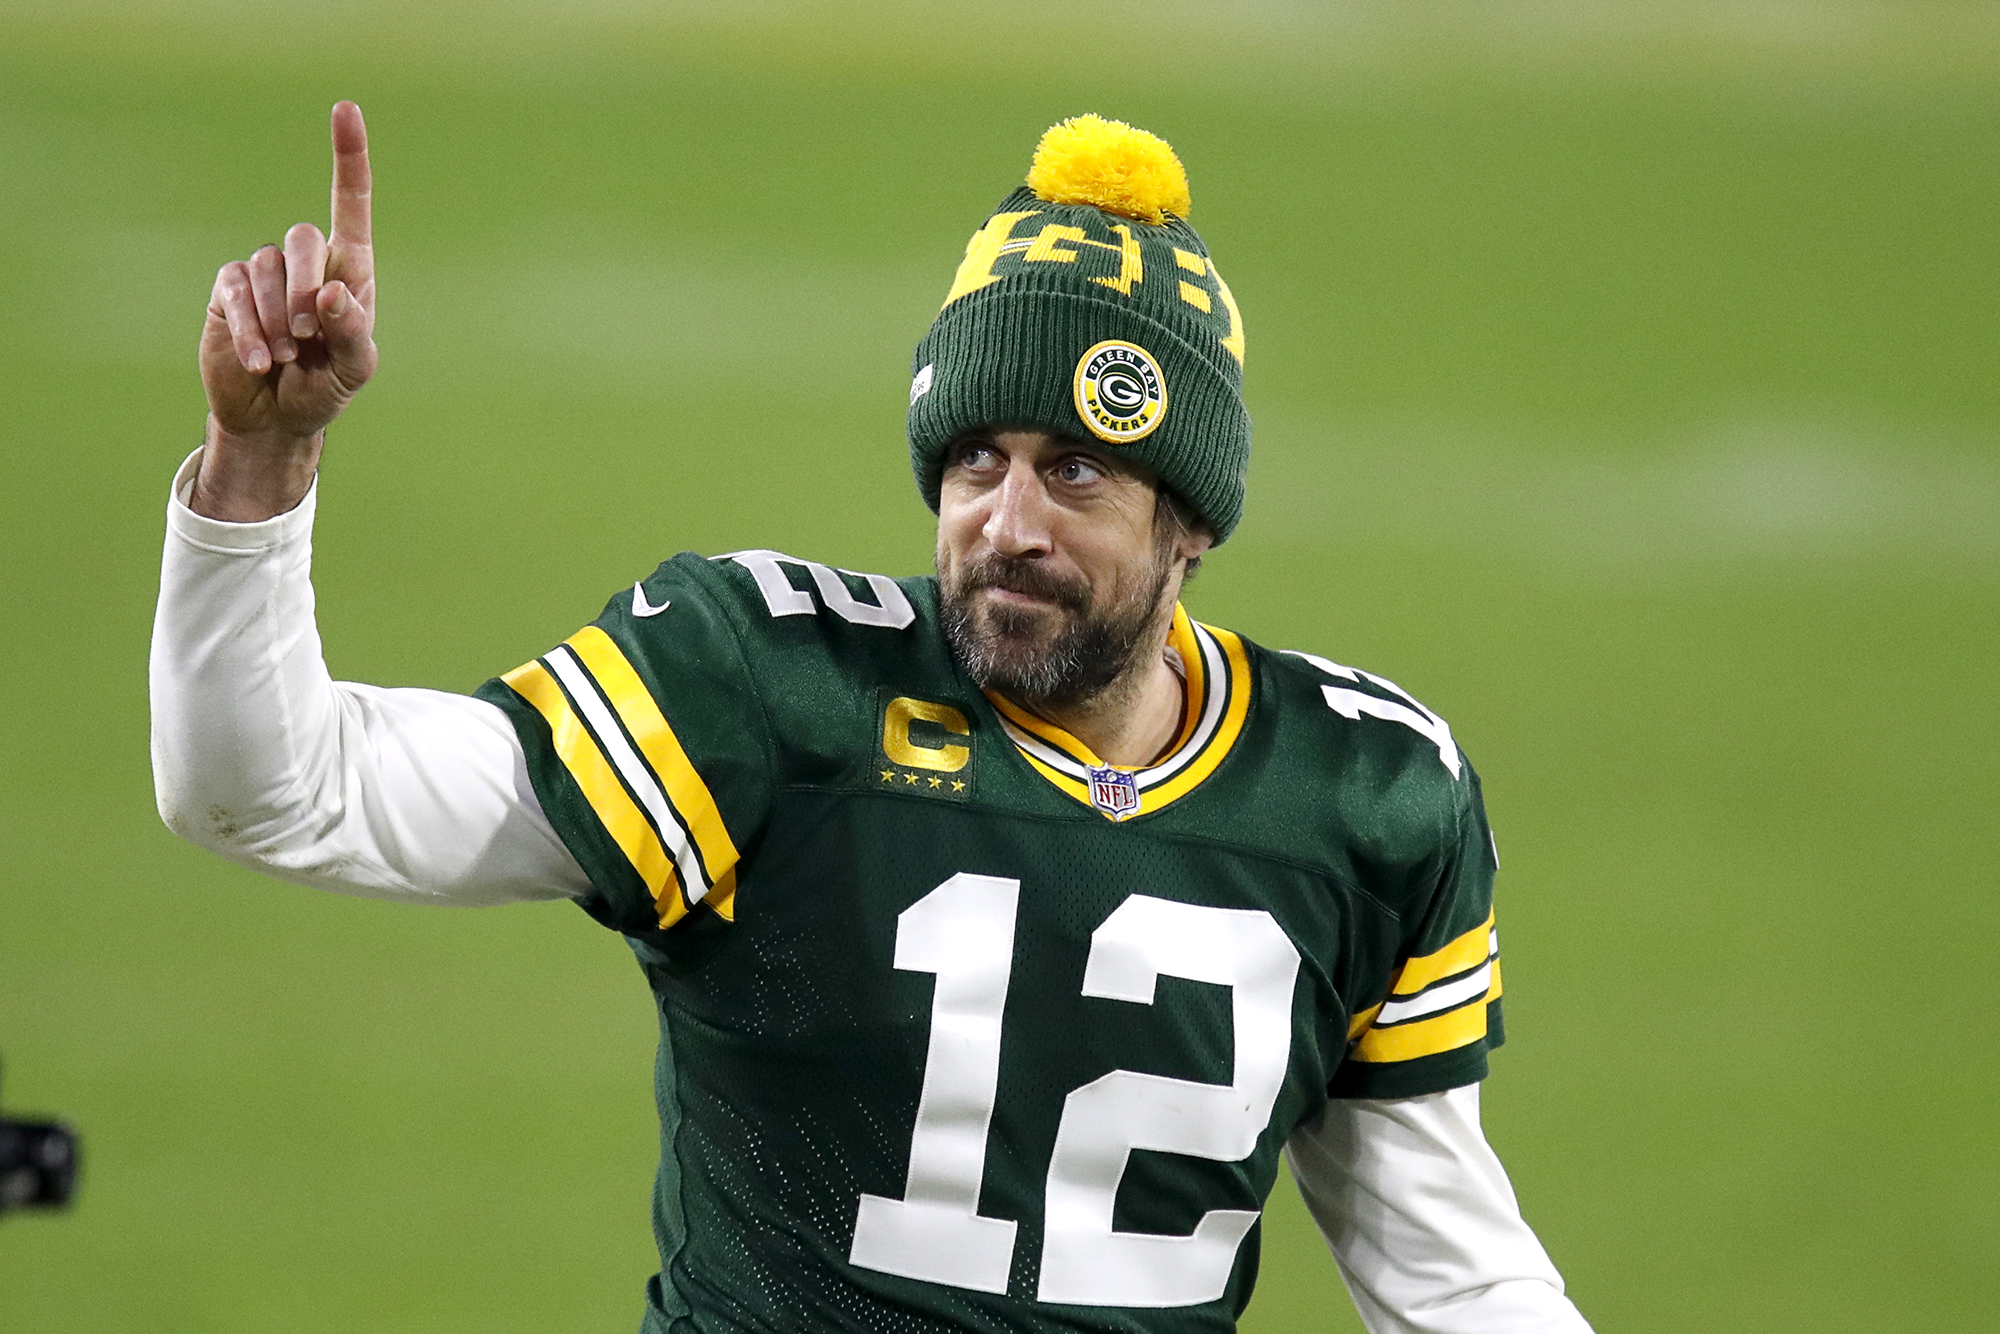 Aaron Rodgers Confirms His Return to Green Bay Packers